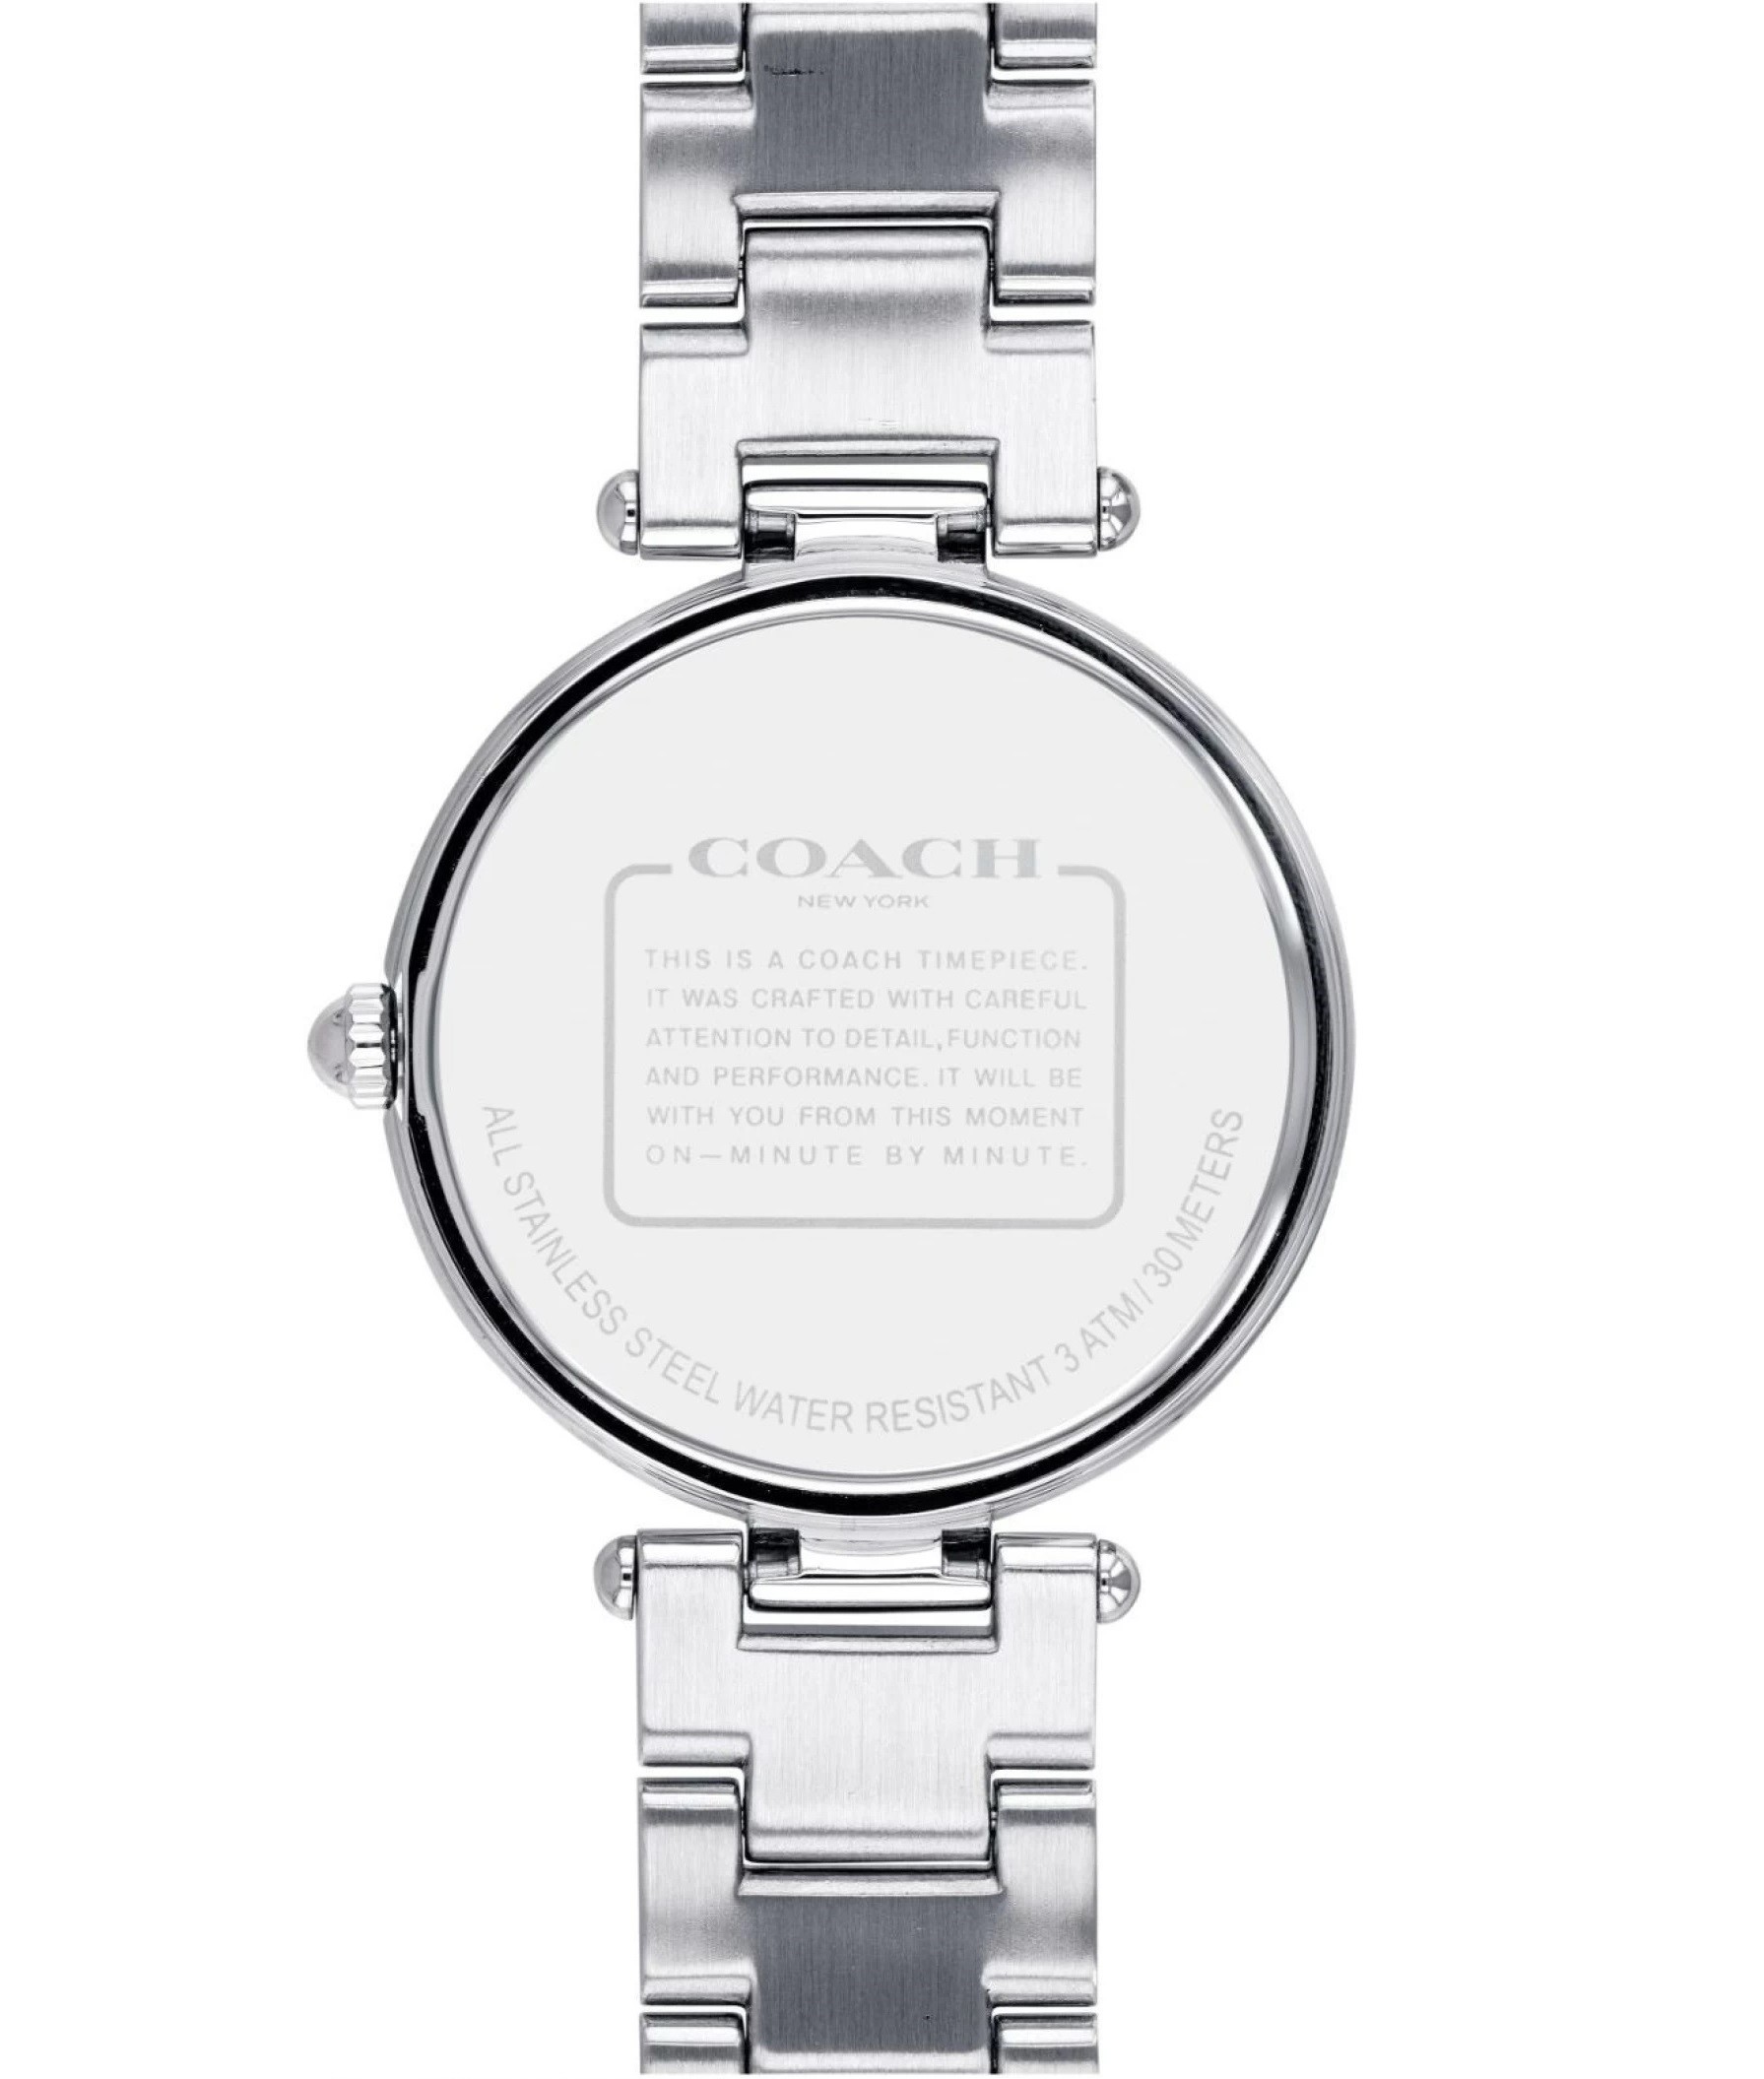  ĐỒNG HỒ COACH DÂY KIM LOẠI PARK QUARTZ WATCH WITH ANALOG DISPLAY AND STAINLESS STEEL STRAP 14503097 9